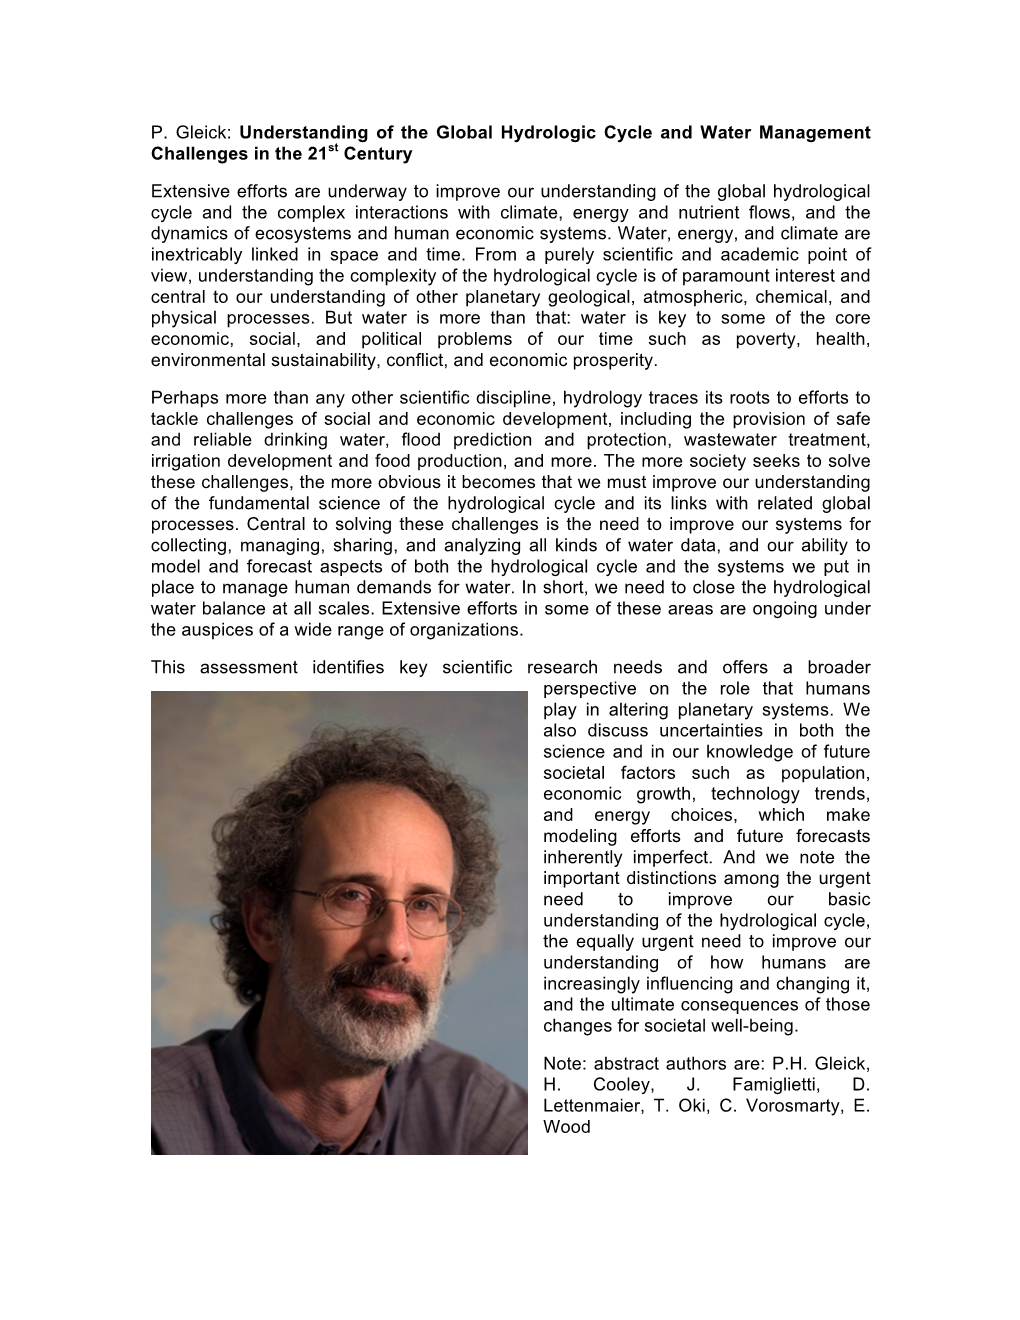 P. Gleick: Understanding of the Global Hydrologic Cycle and Water Management Challenges in the 21St Century